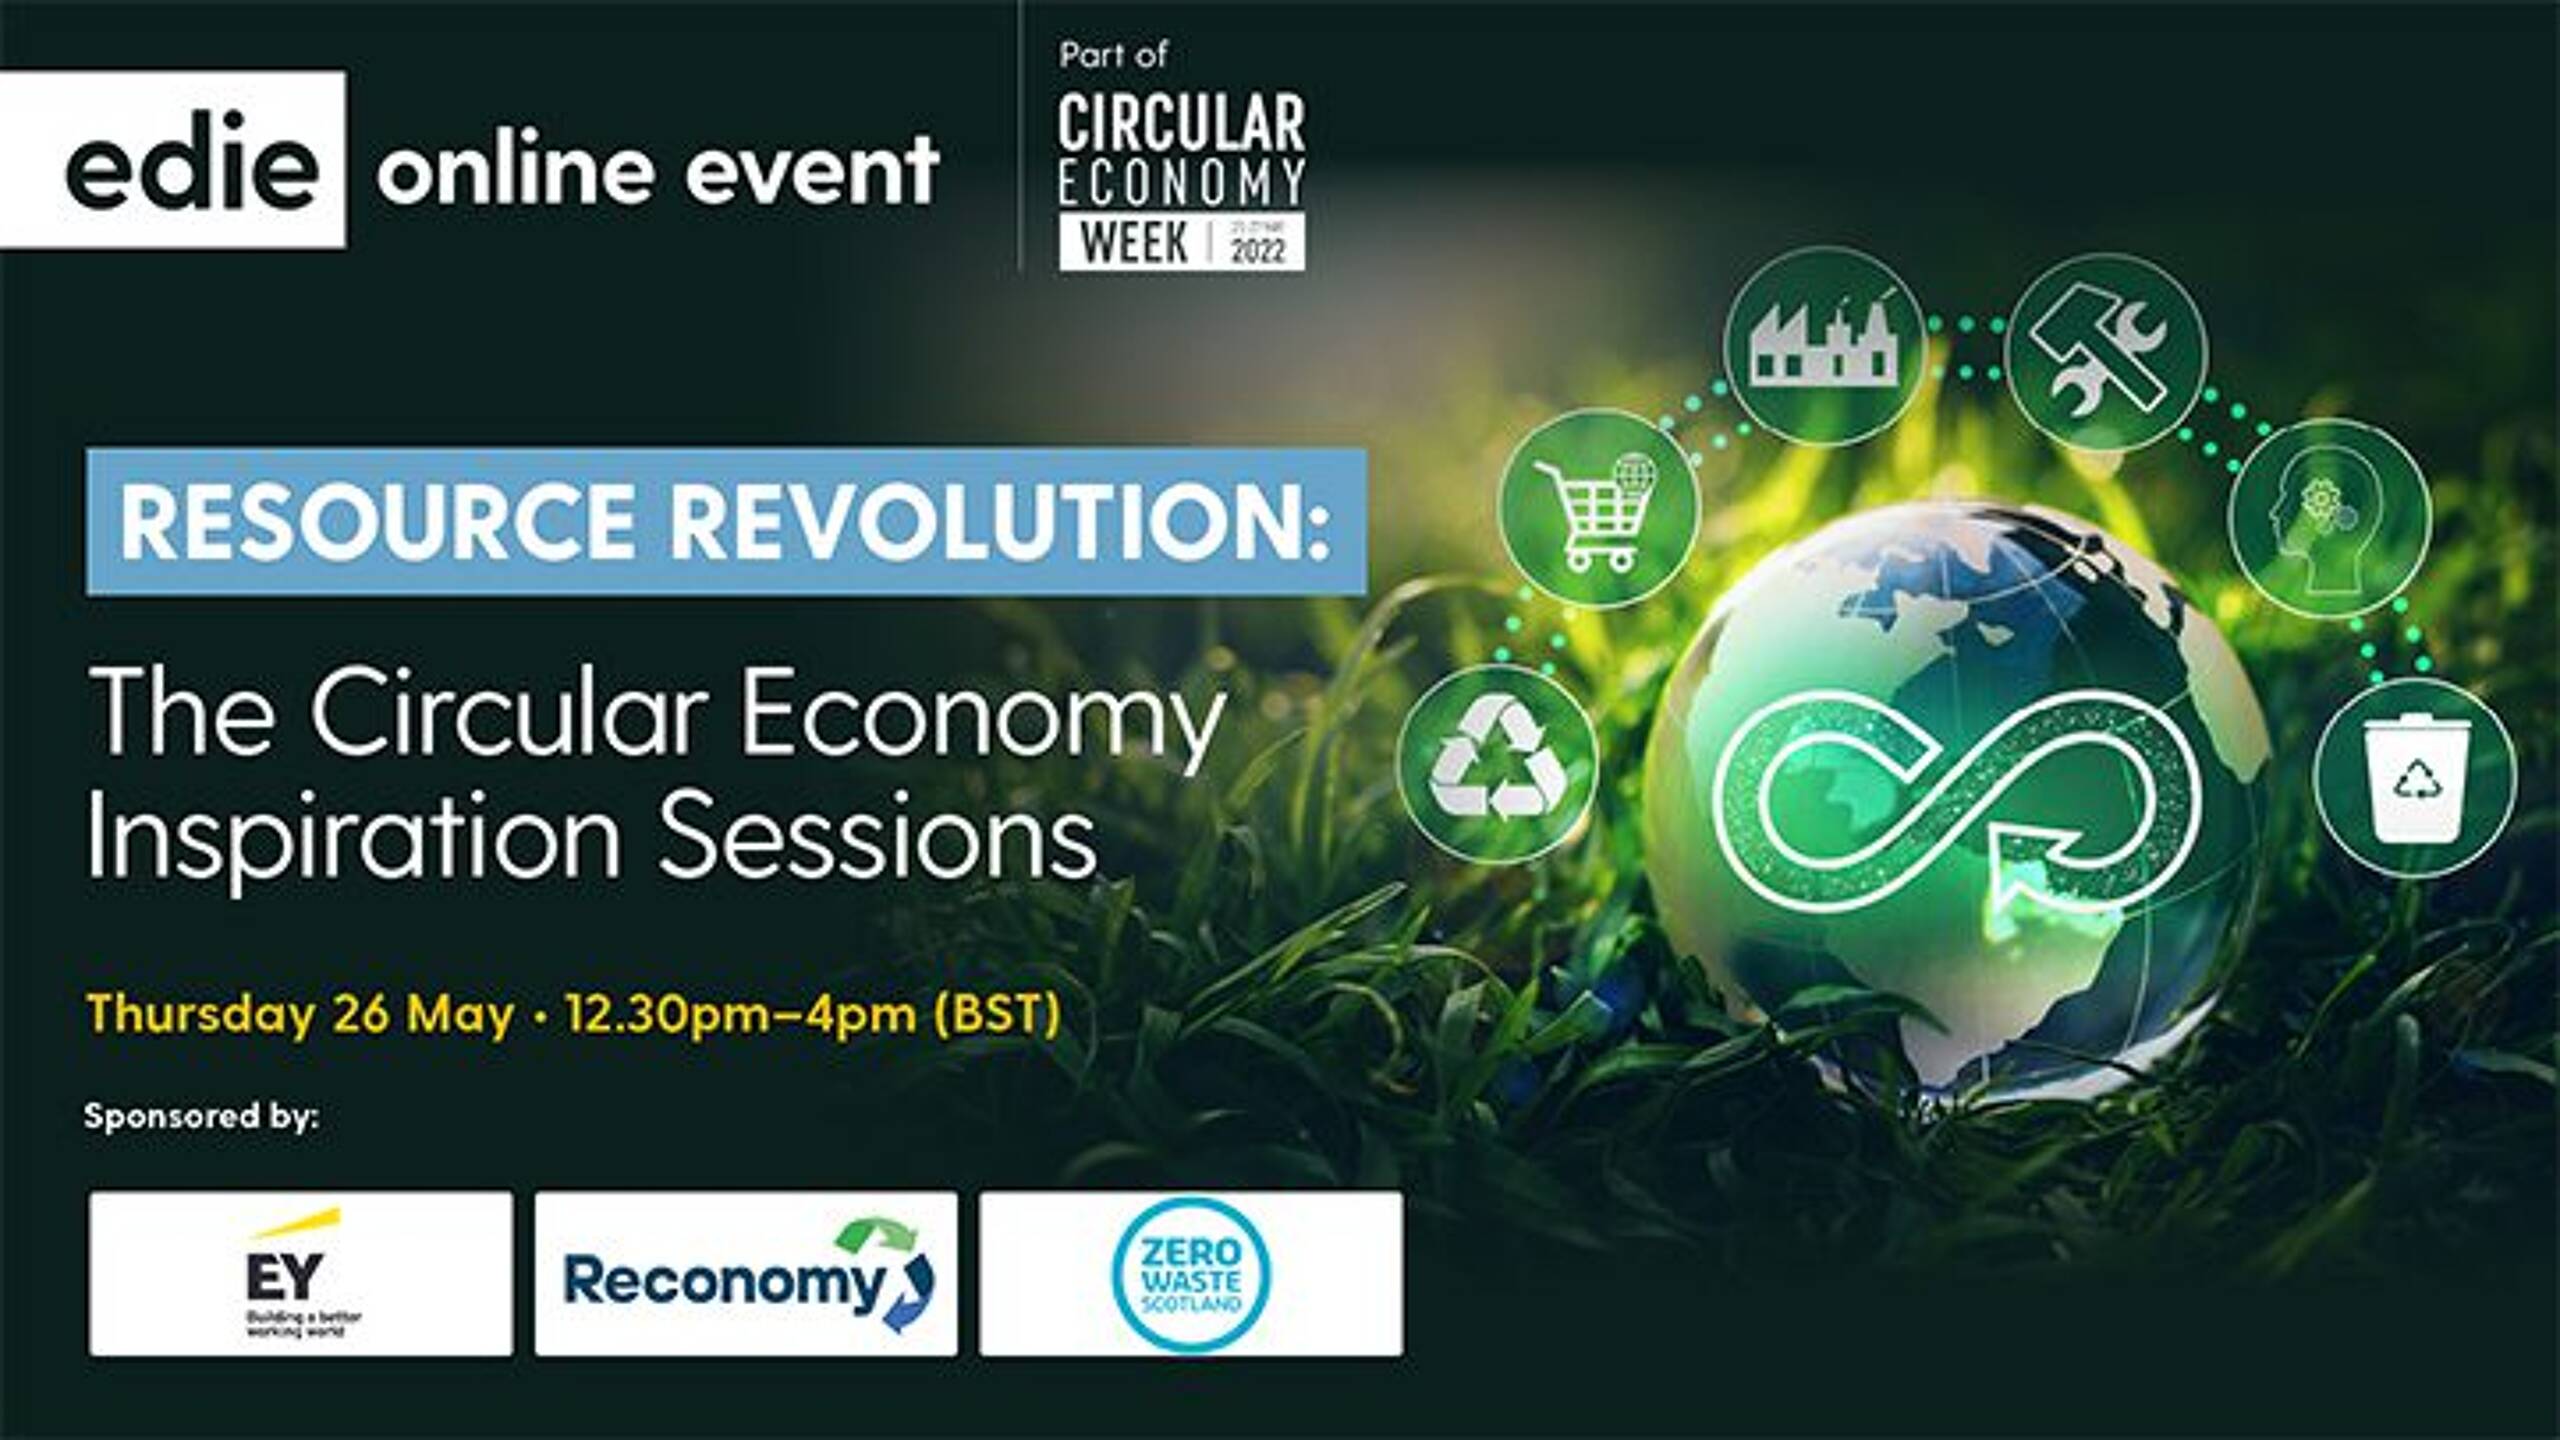 Available to watch on-demand: edie’s Circular Economy Inspiration Sessions featuring Mars, L’Oreal, Canon and more